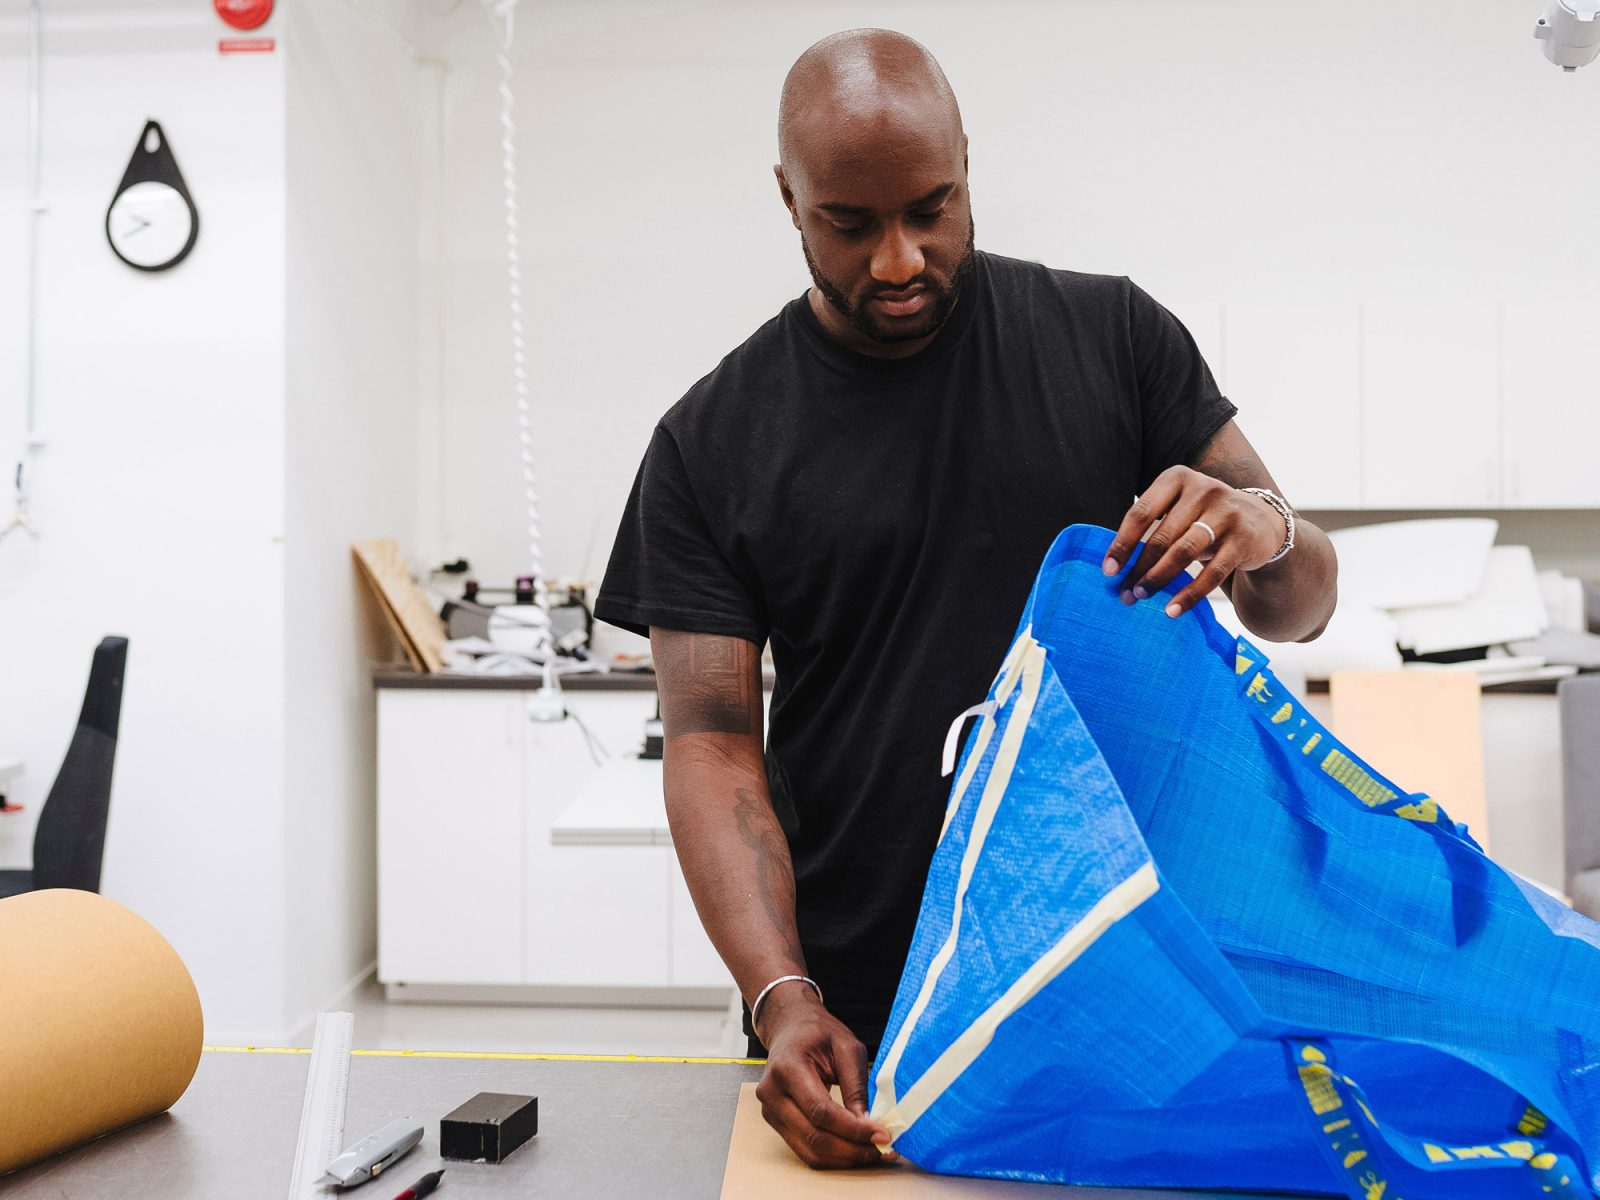 5 times, the IKEA Blue Bag carried the unexpected and the macabre - IKEA  Hackers